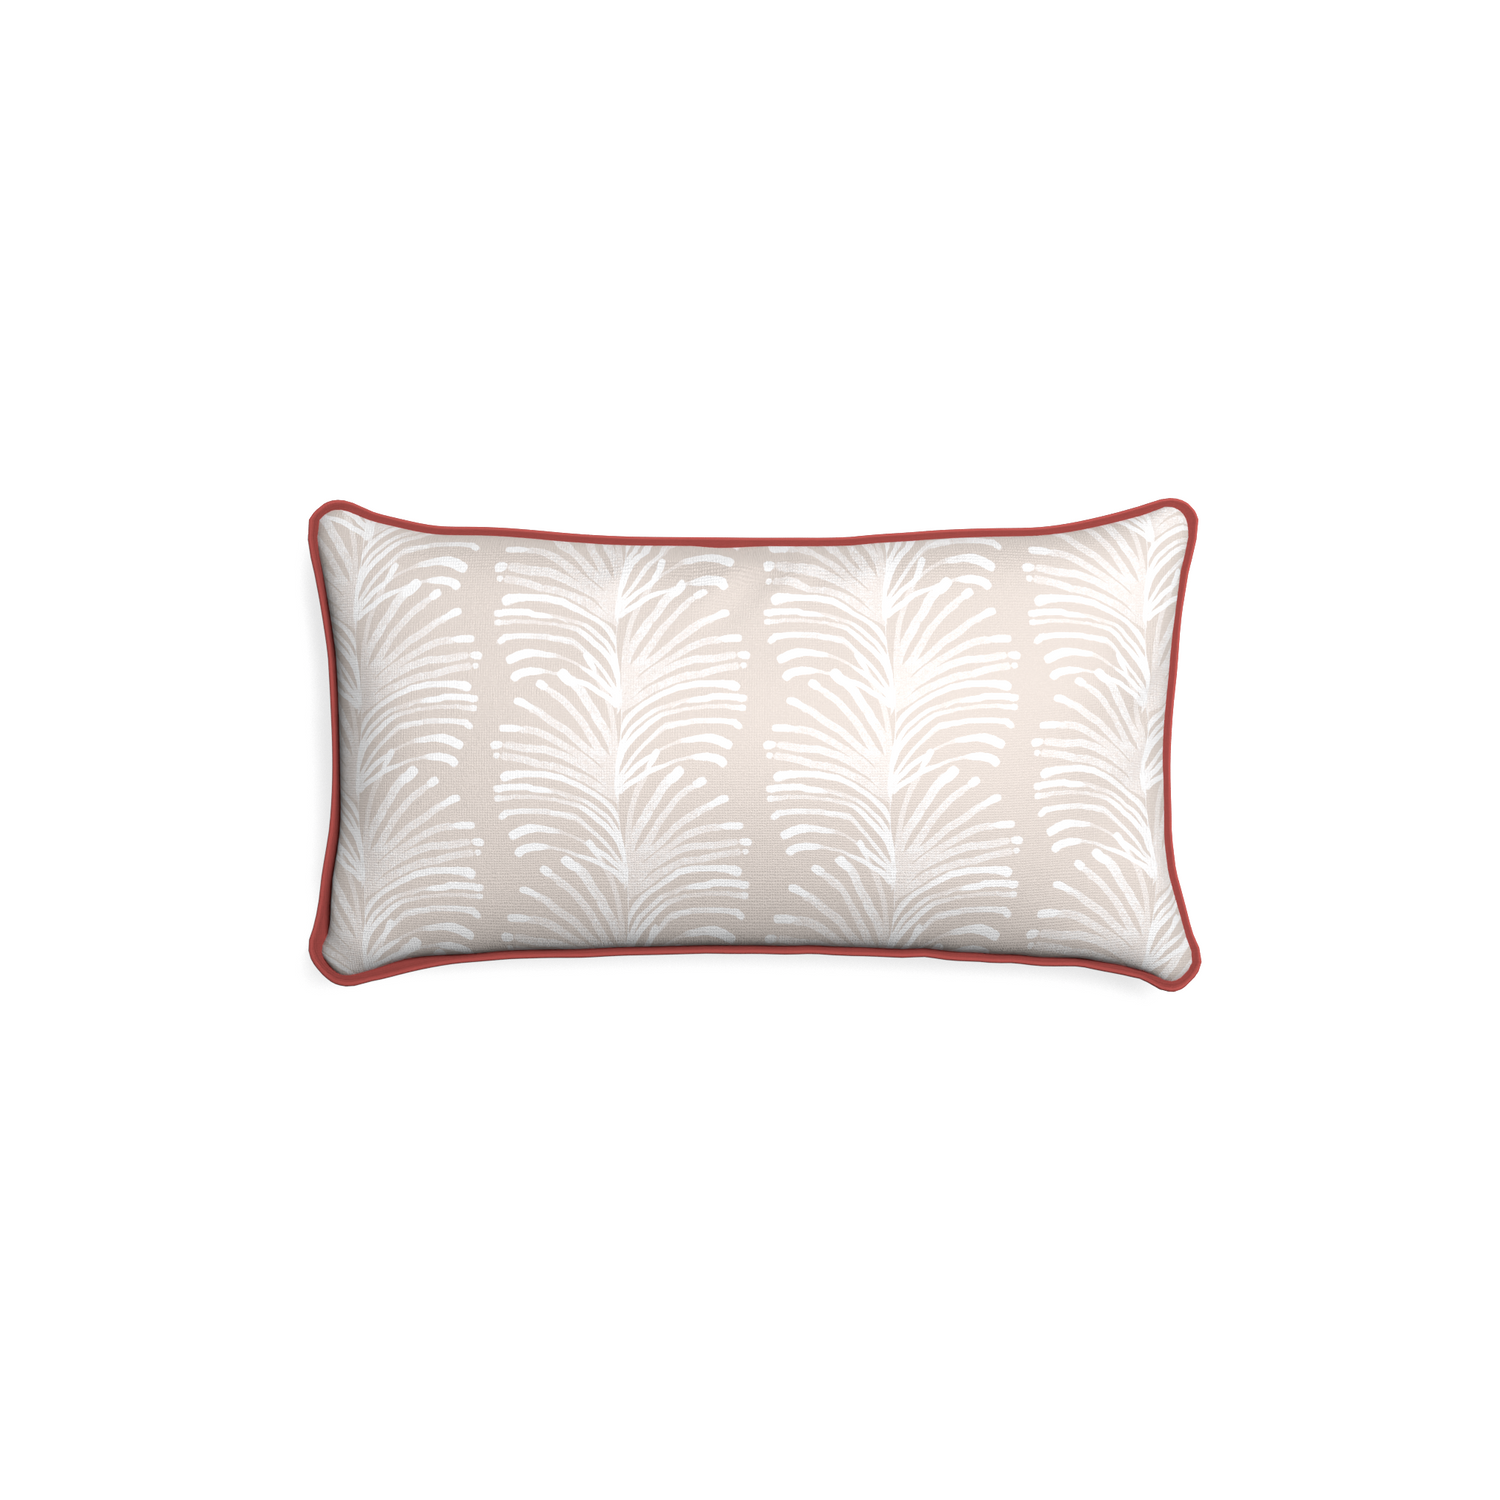 Petite-lumbar emma sand custom sand colored botanical stripepillow with c piping on white background